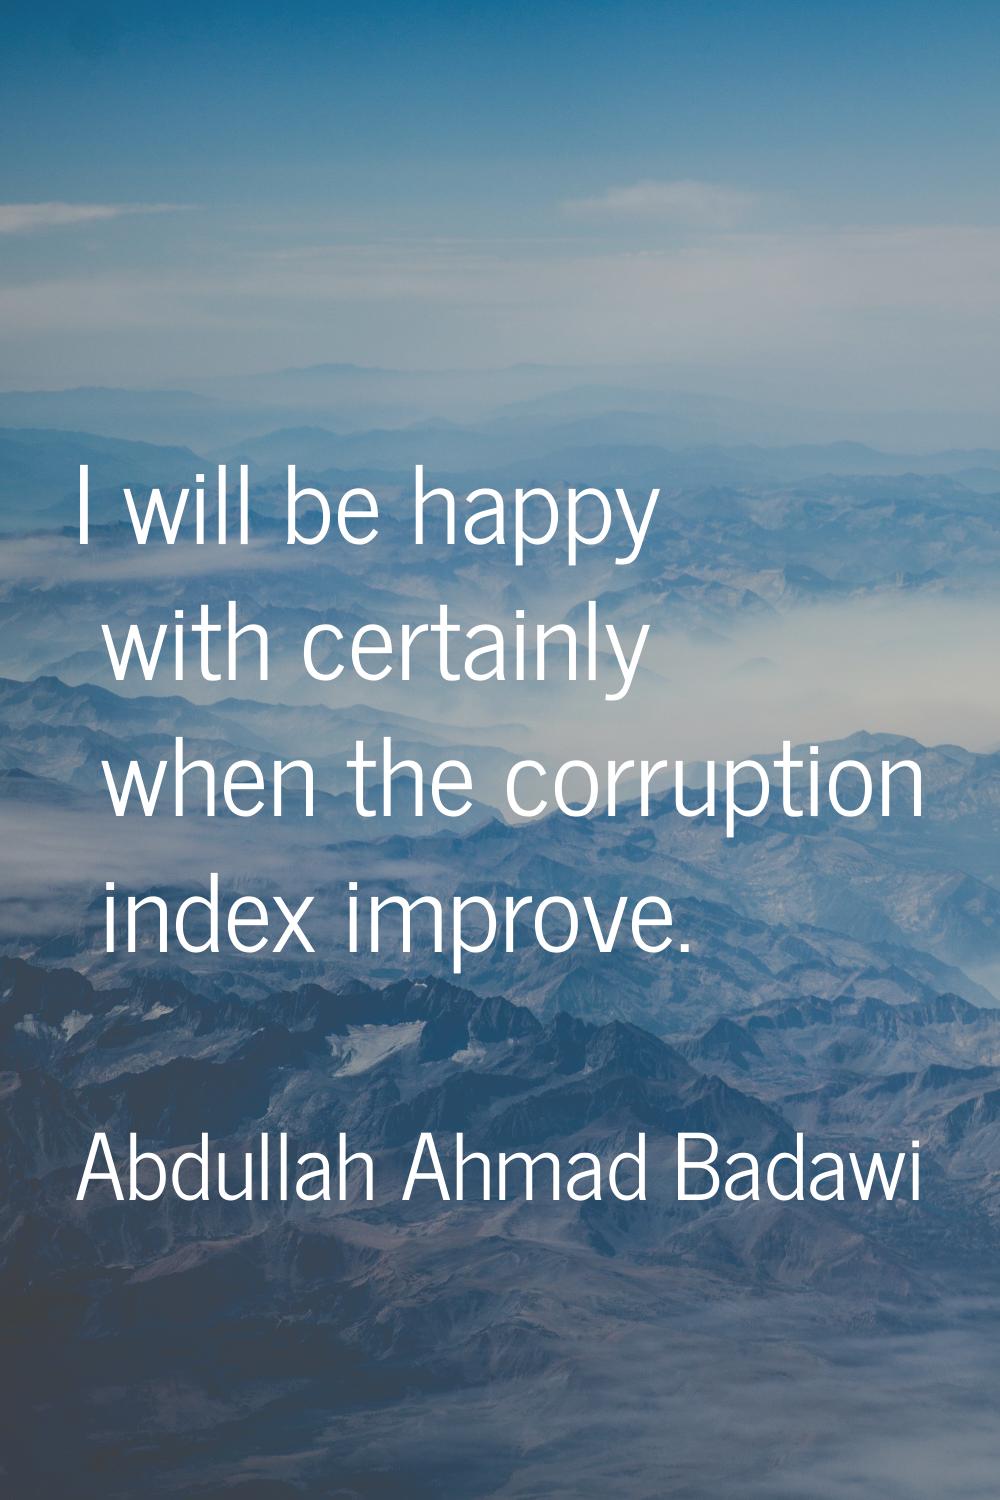 I will be happy with certainly when the corruption index improve.